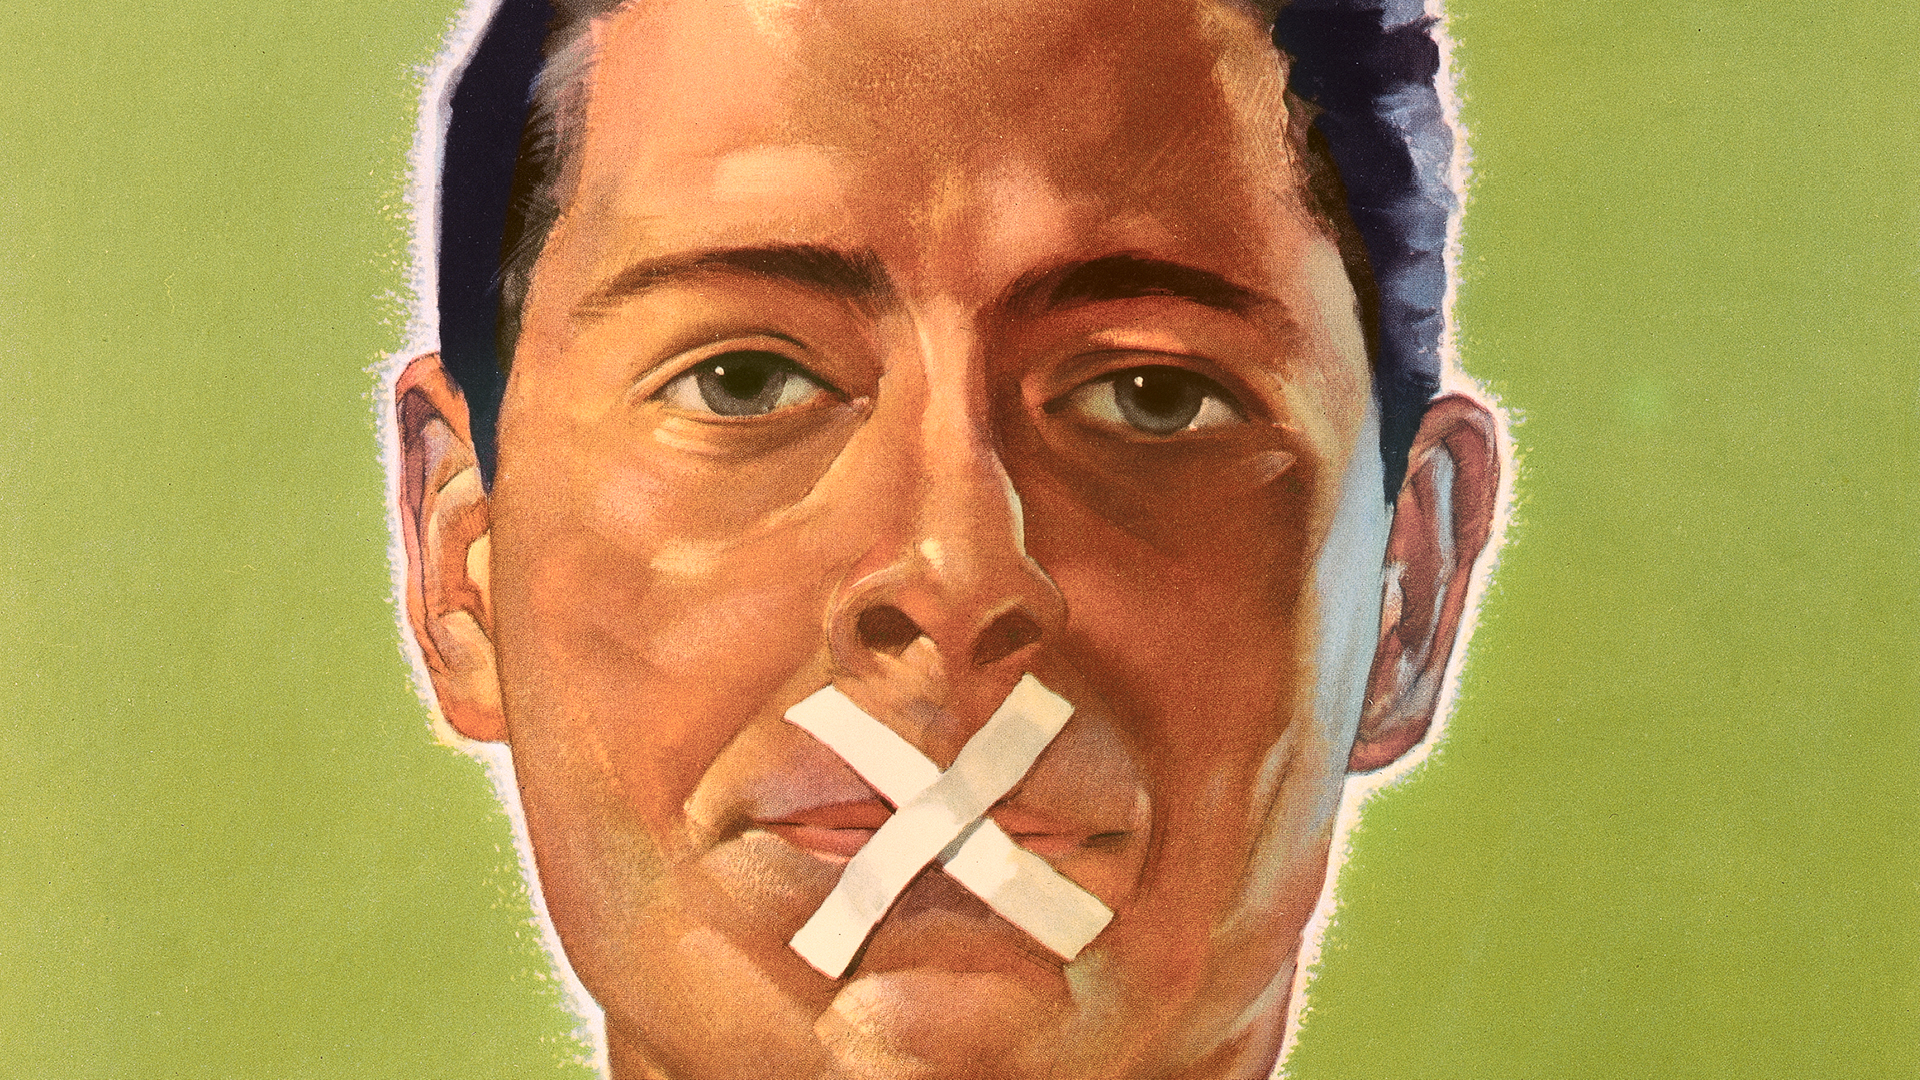 A cropped lithographic poster of a man's face with an X across his lips.